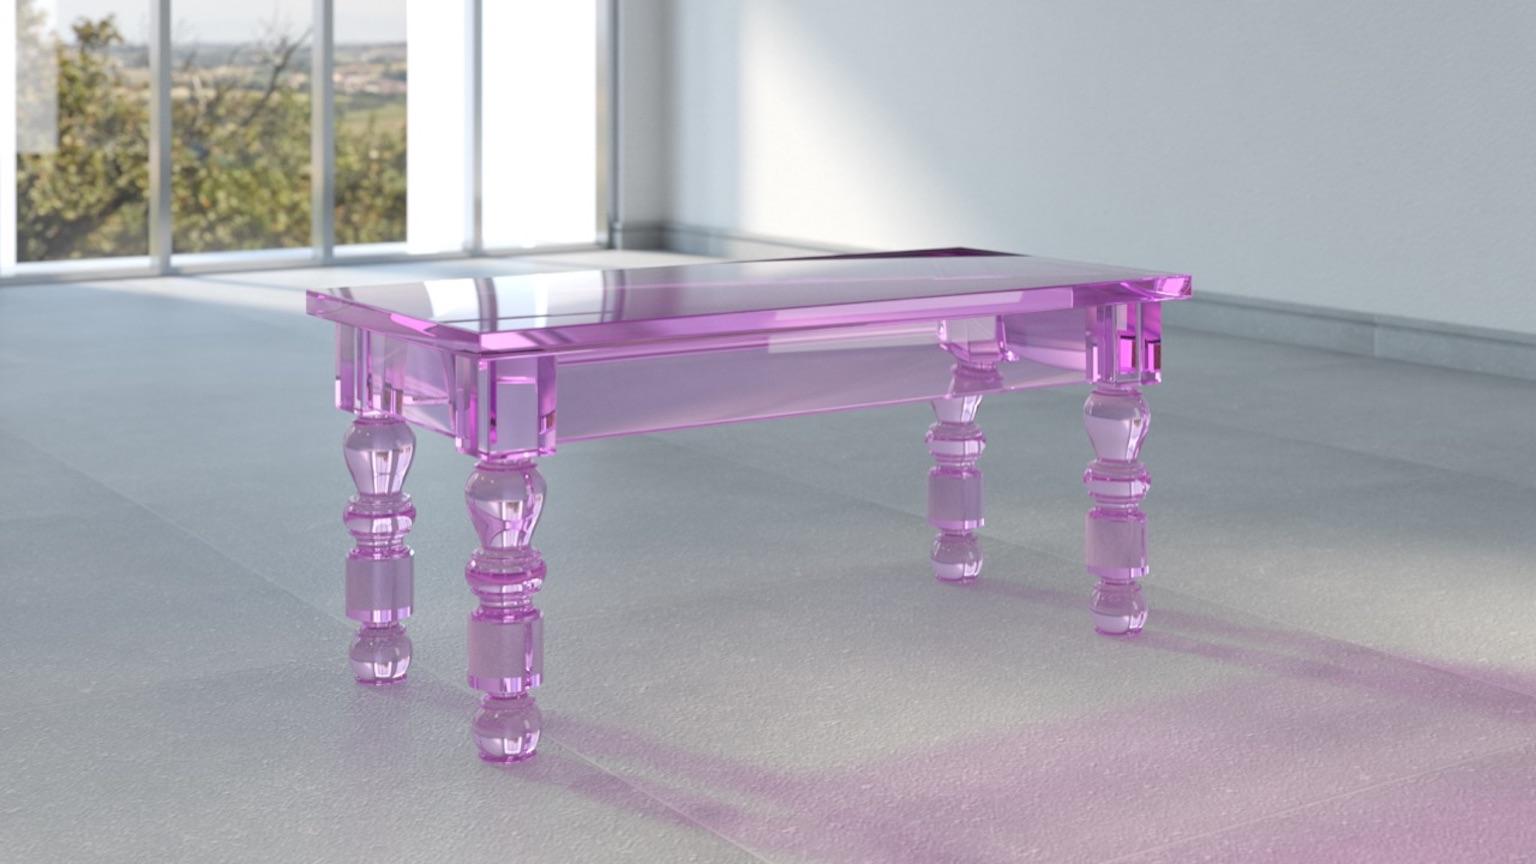 Post Rural model coffee table designed by Studio Superego for Superego Editions. Colored plexiglass table revisiting rural design.

Biography
Superego editions was born in 2006, performing a constant activity of research in decorative arts by